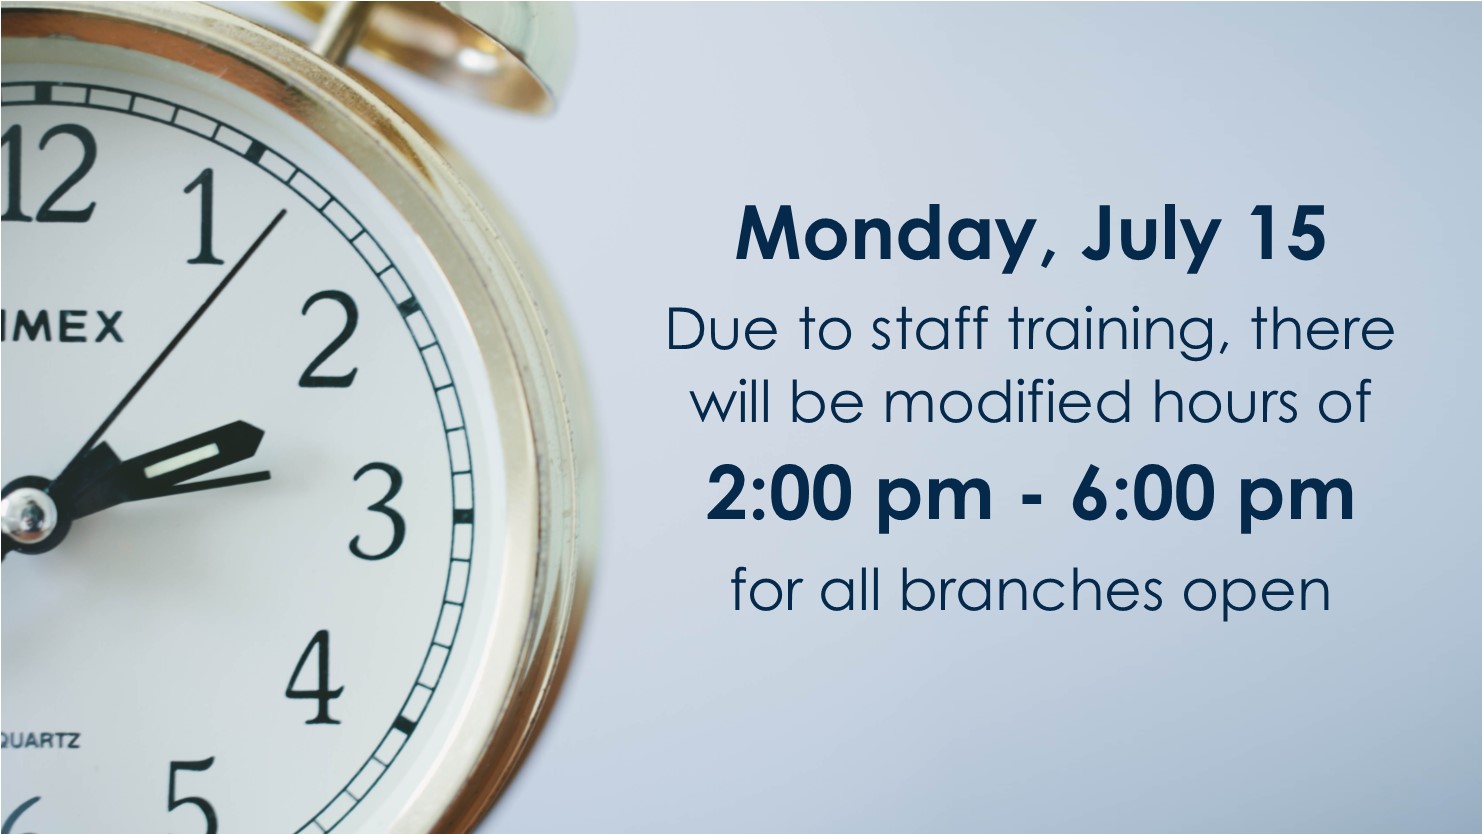 Monday, July 15: Due to staff training, there will be modified hours of 2:00 pm - 6:00 pm for all branches open.